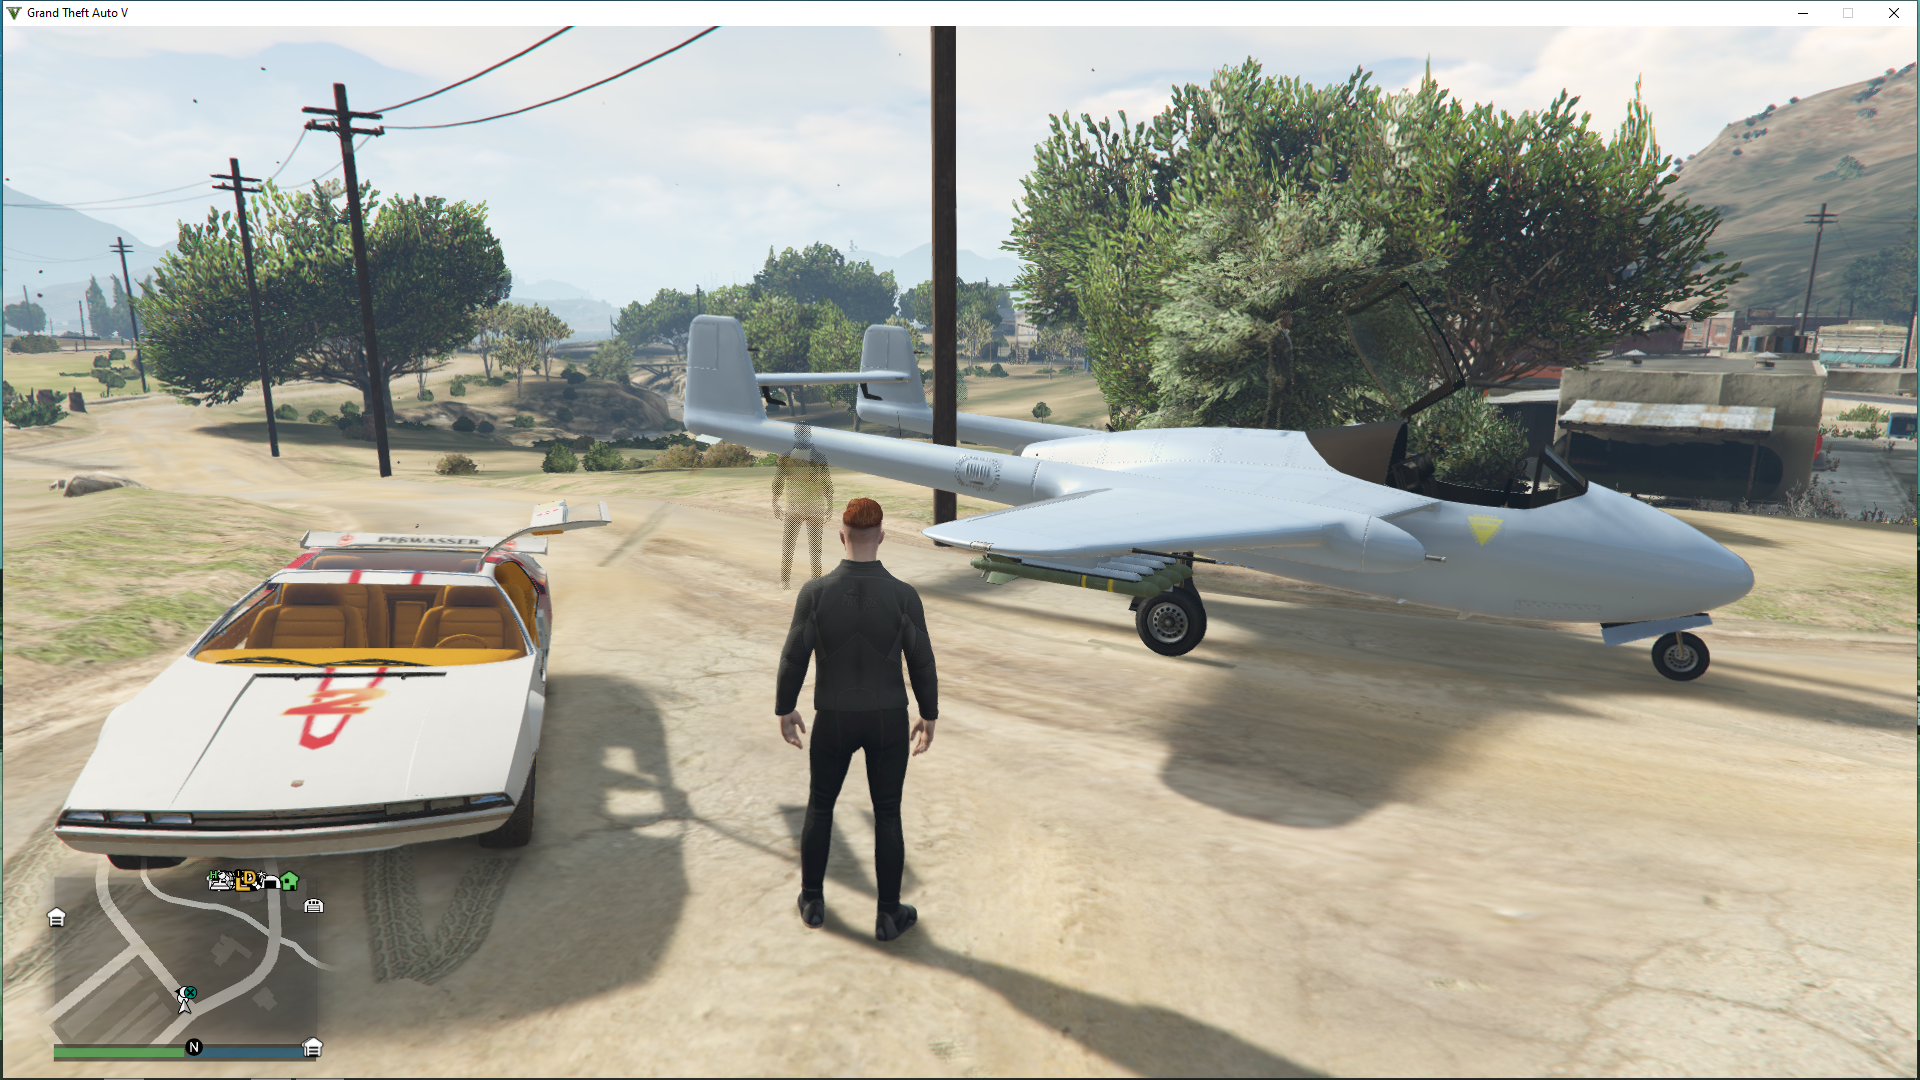 The Worst Possible Spawning Spot For An Aircraft Gtaonline